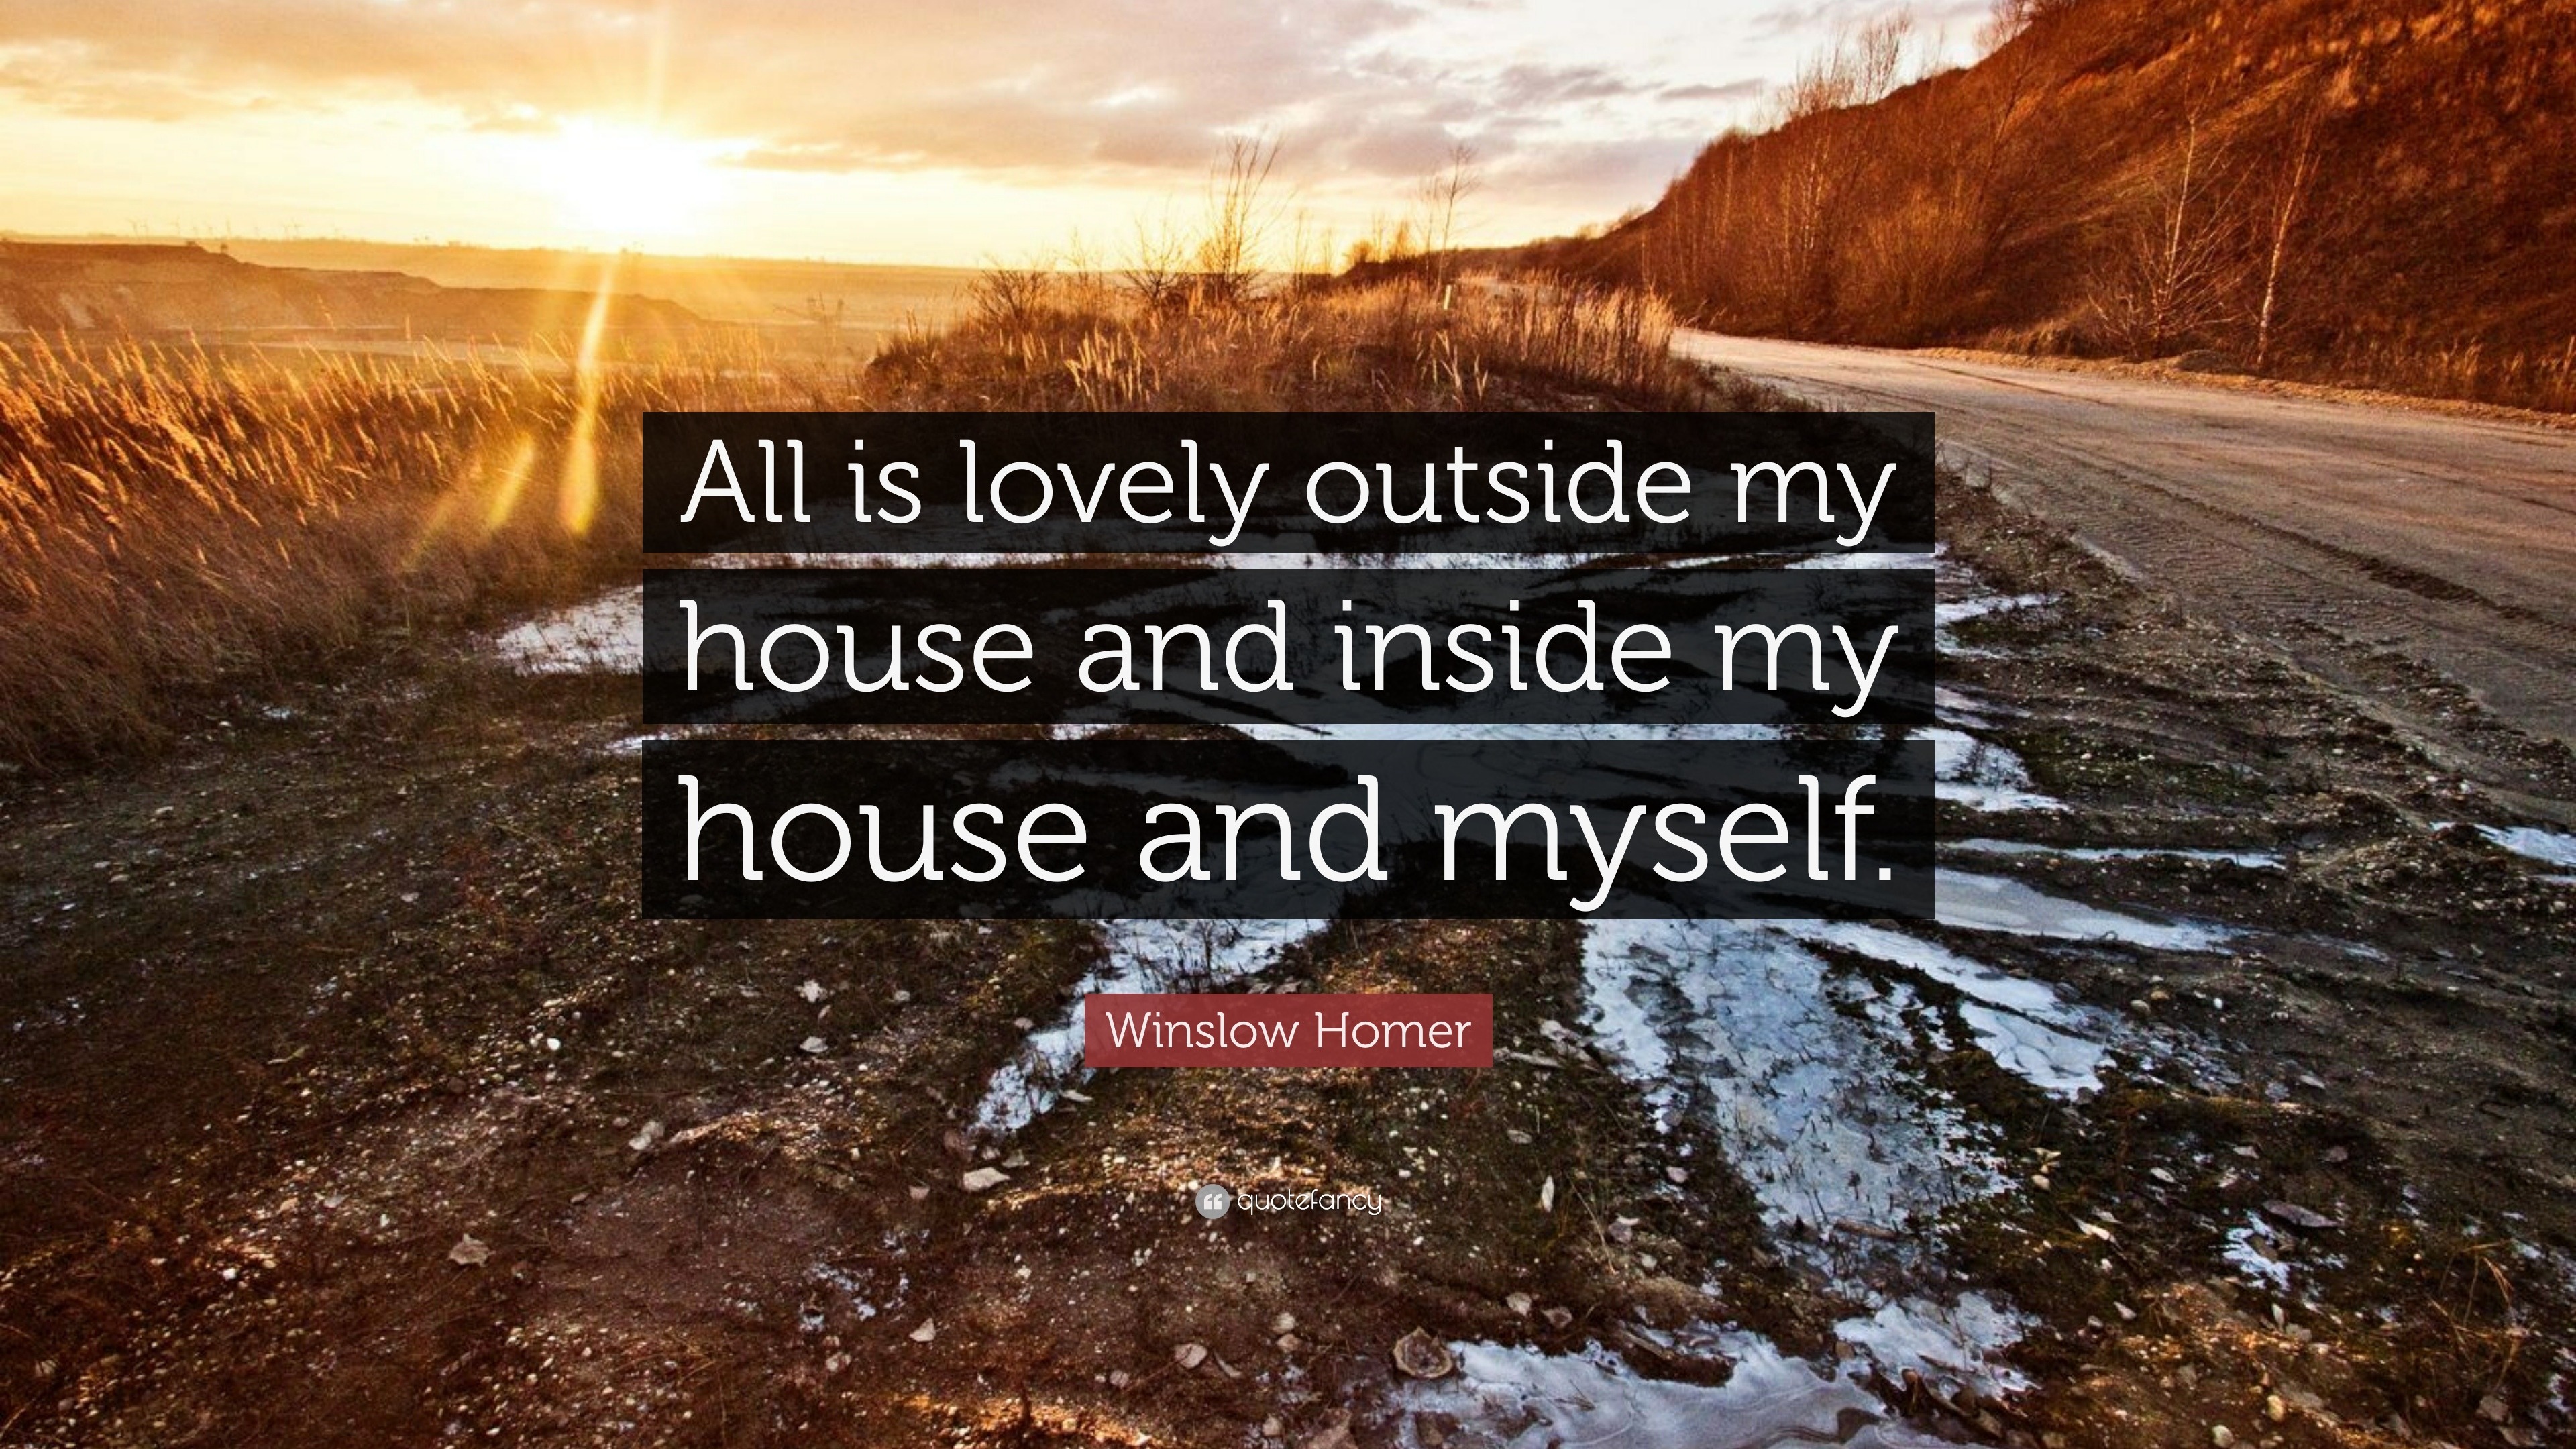 Winslow Homer Quote: “All is lovely outside my house and inside my ...